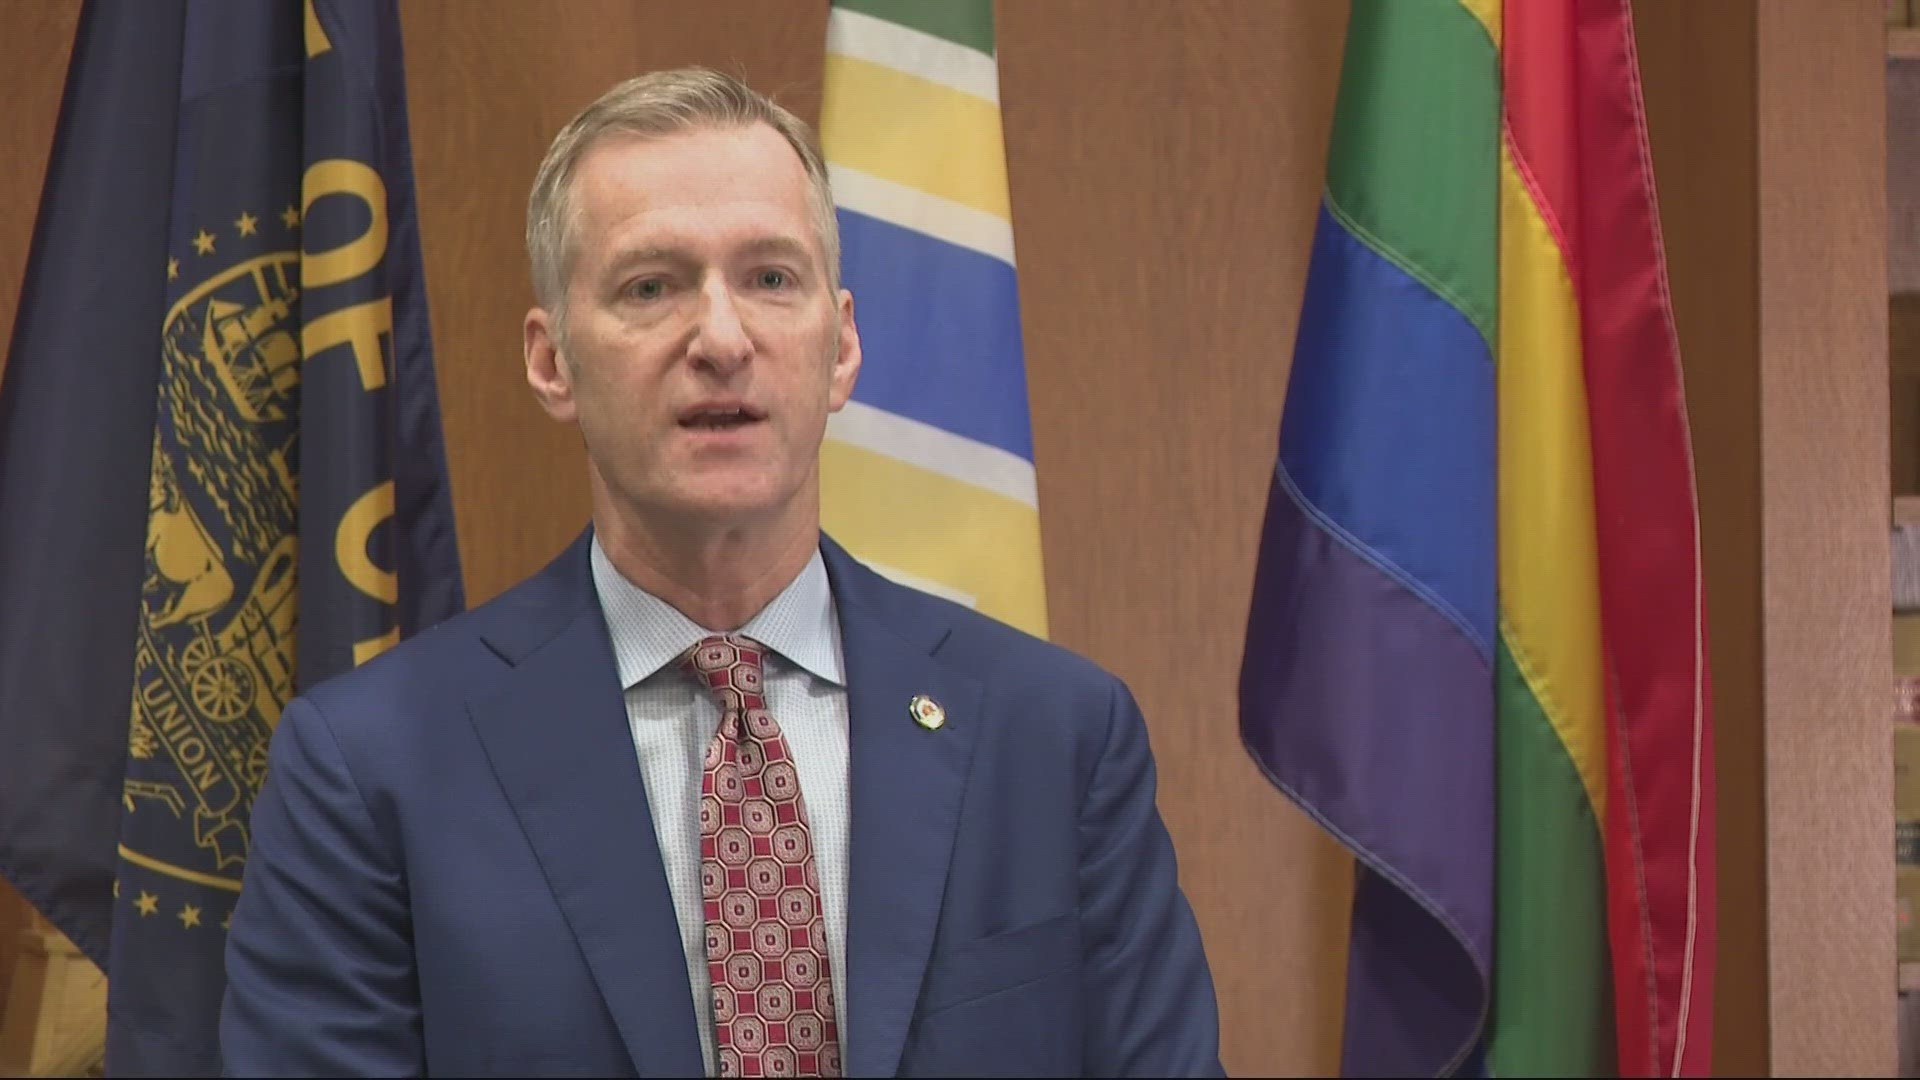 On Wednesday, Mayor Ted Wheeler and Portland Police Chief Bob Day, held a meeting to address public safety priorities for the city.